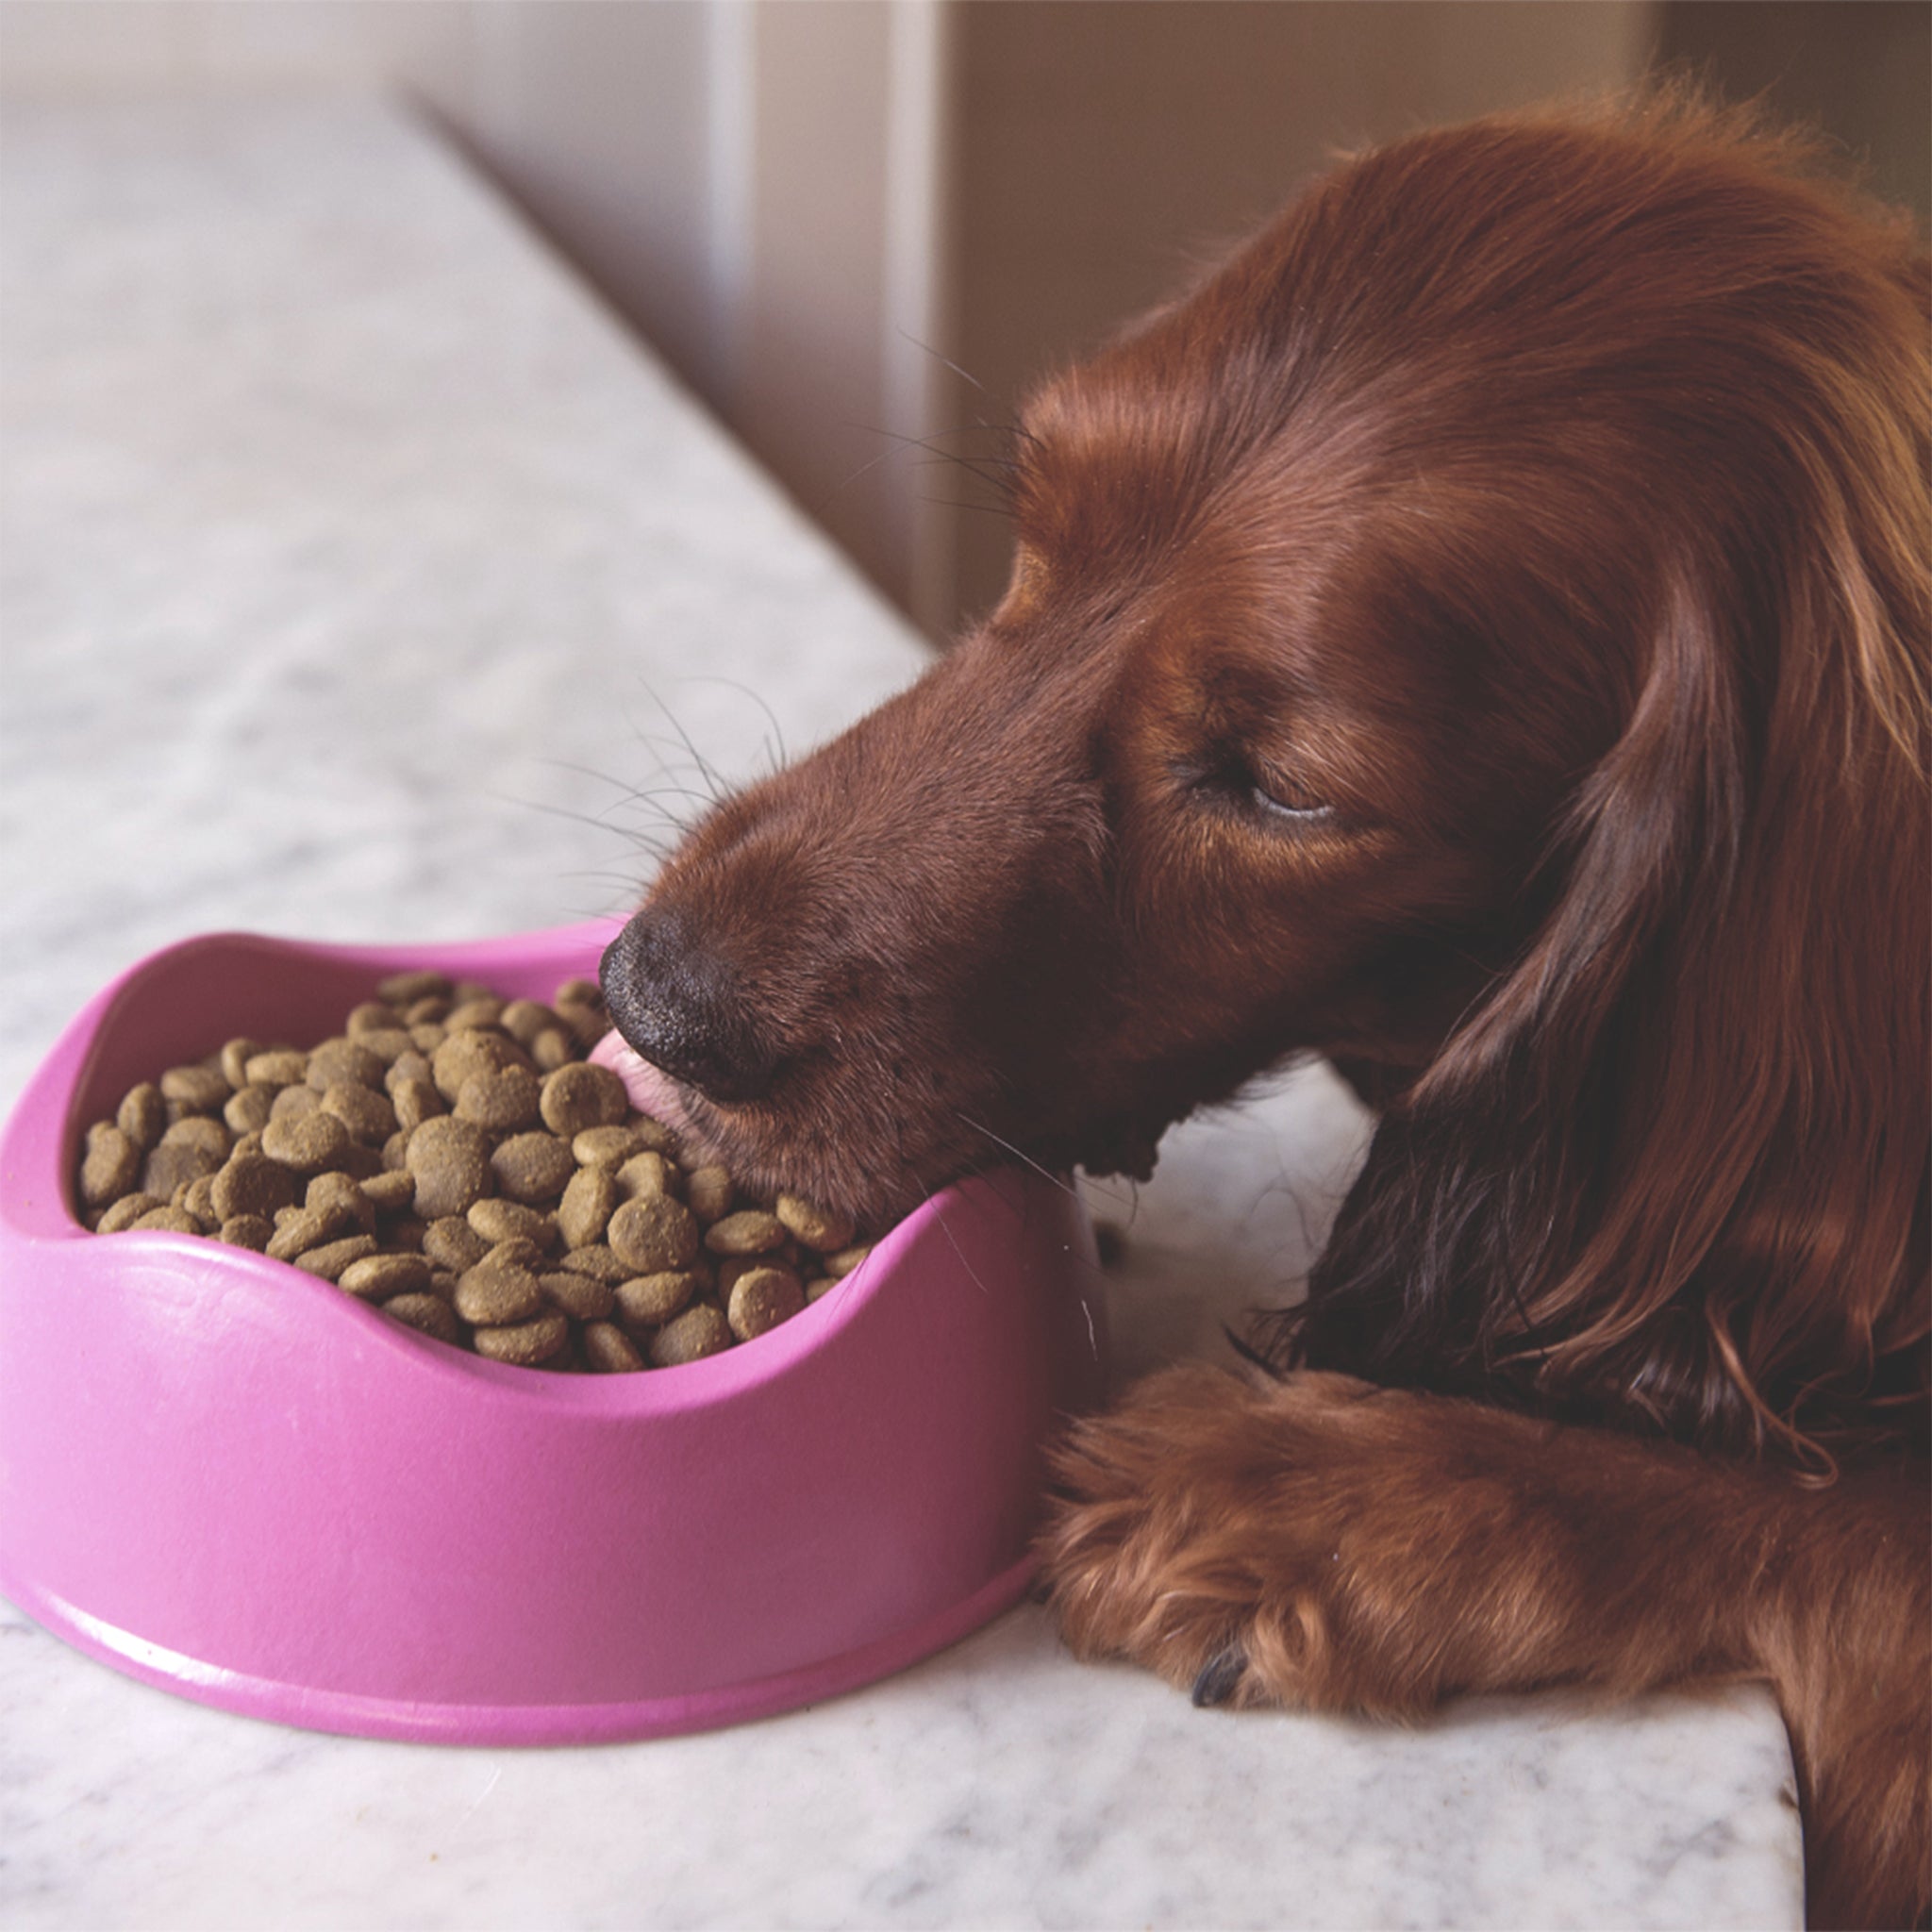 A lifestyle image showing a dog eating food from a pink Beco bowl.